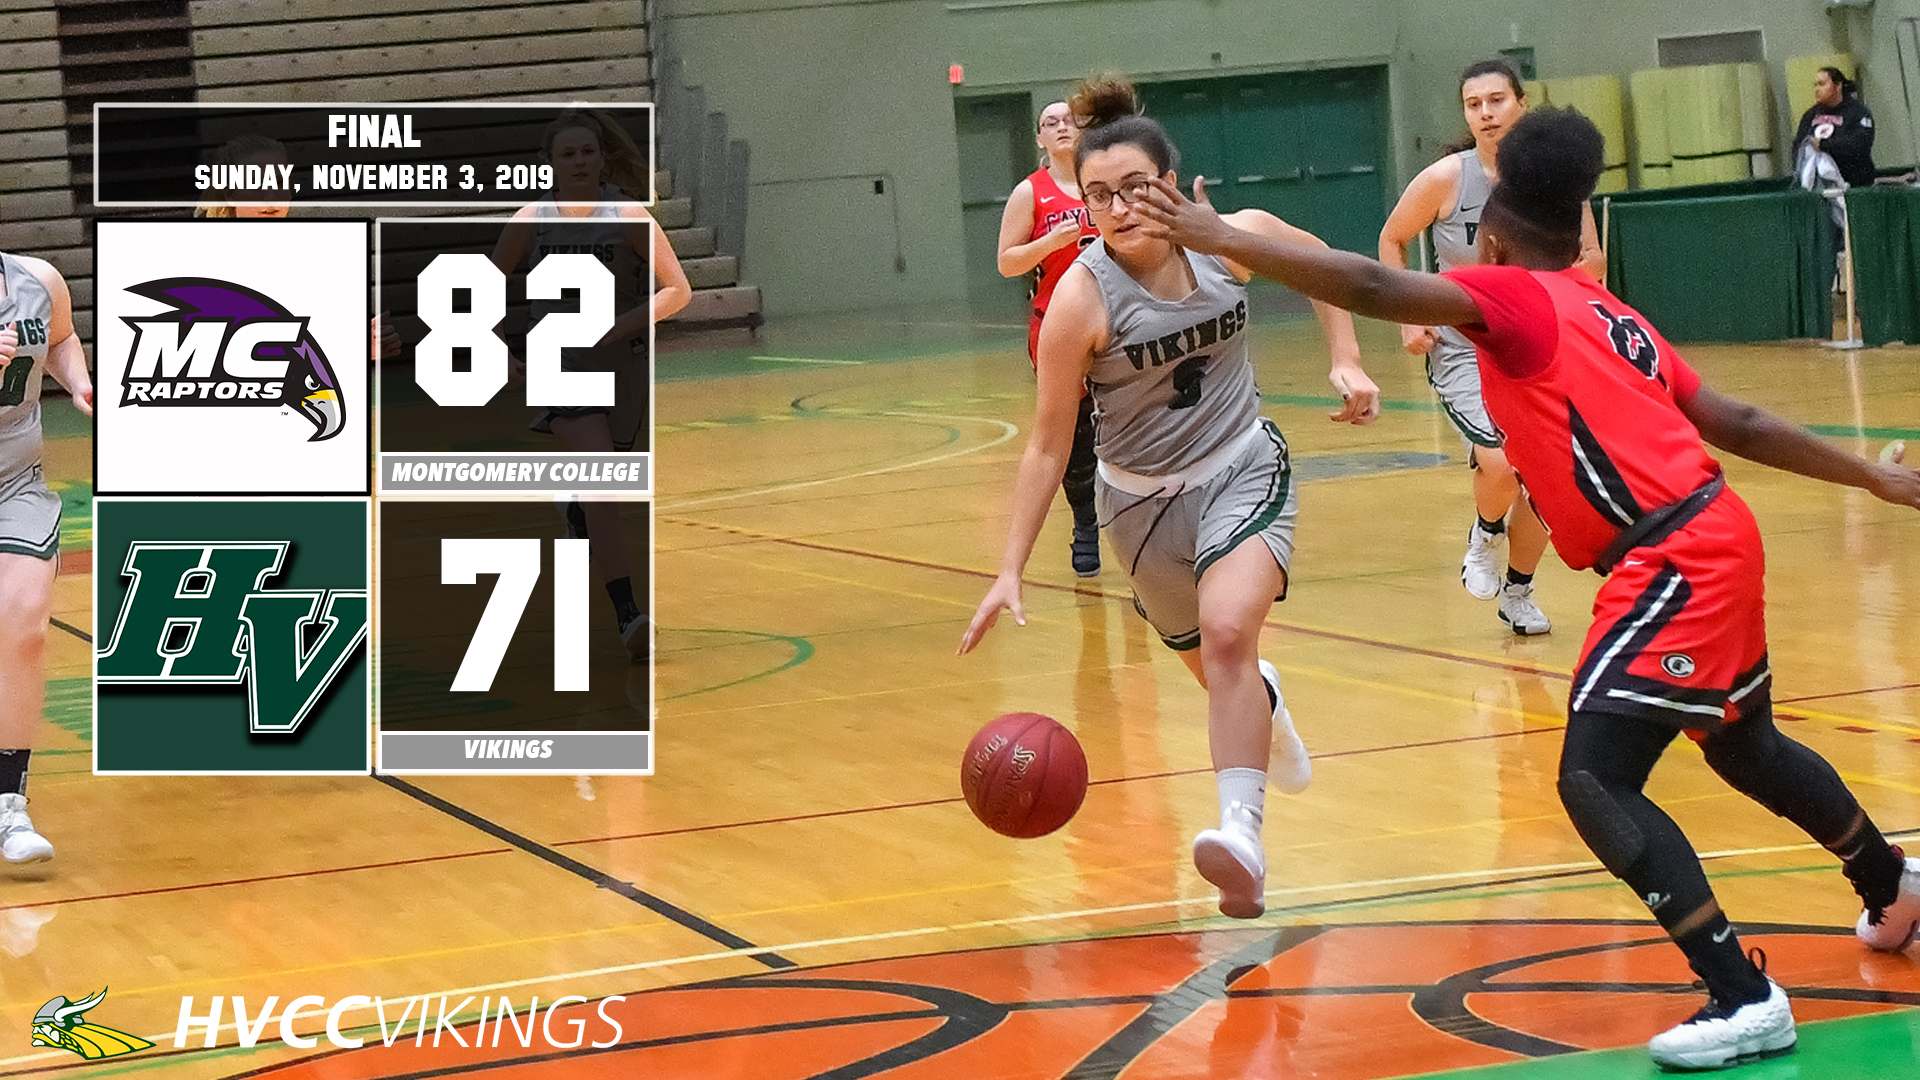 Women's basketball defeated by Montgomery College 82-71 on 11/3/2019.